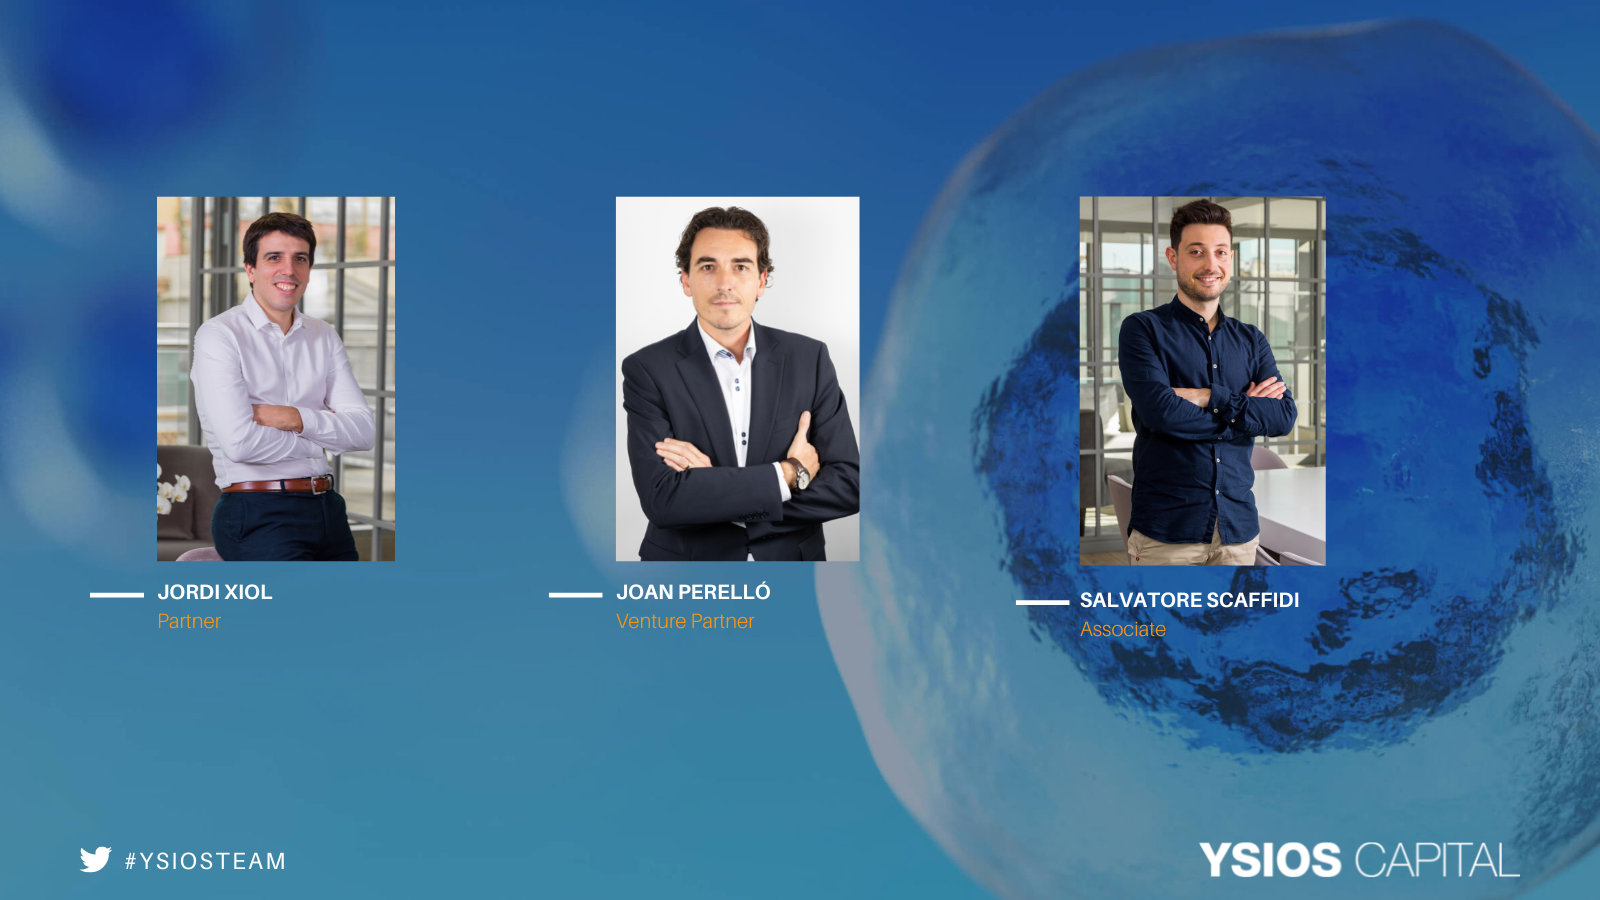 Ysios Capital strengthens its team with internal promotions and a new Venture Partner<